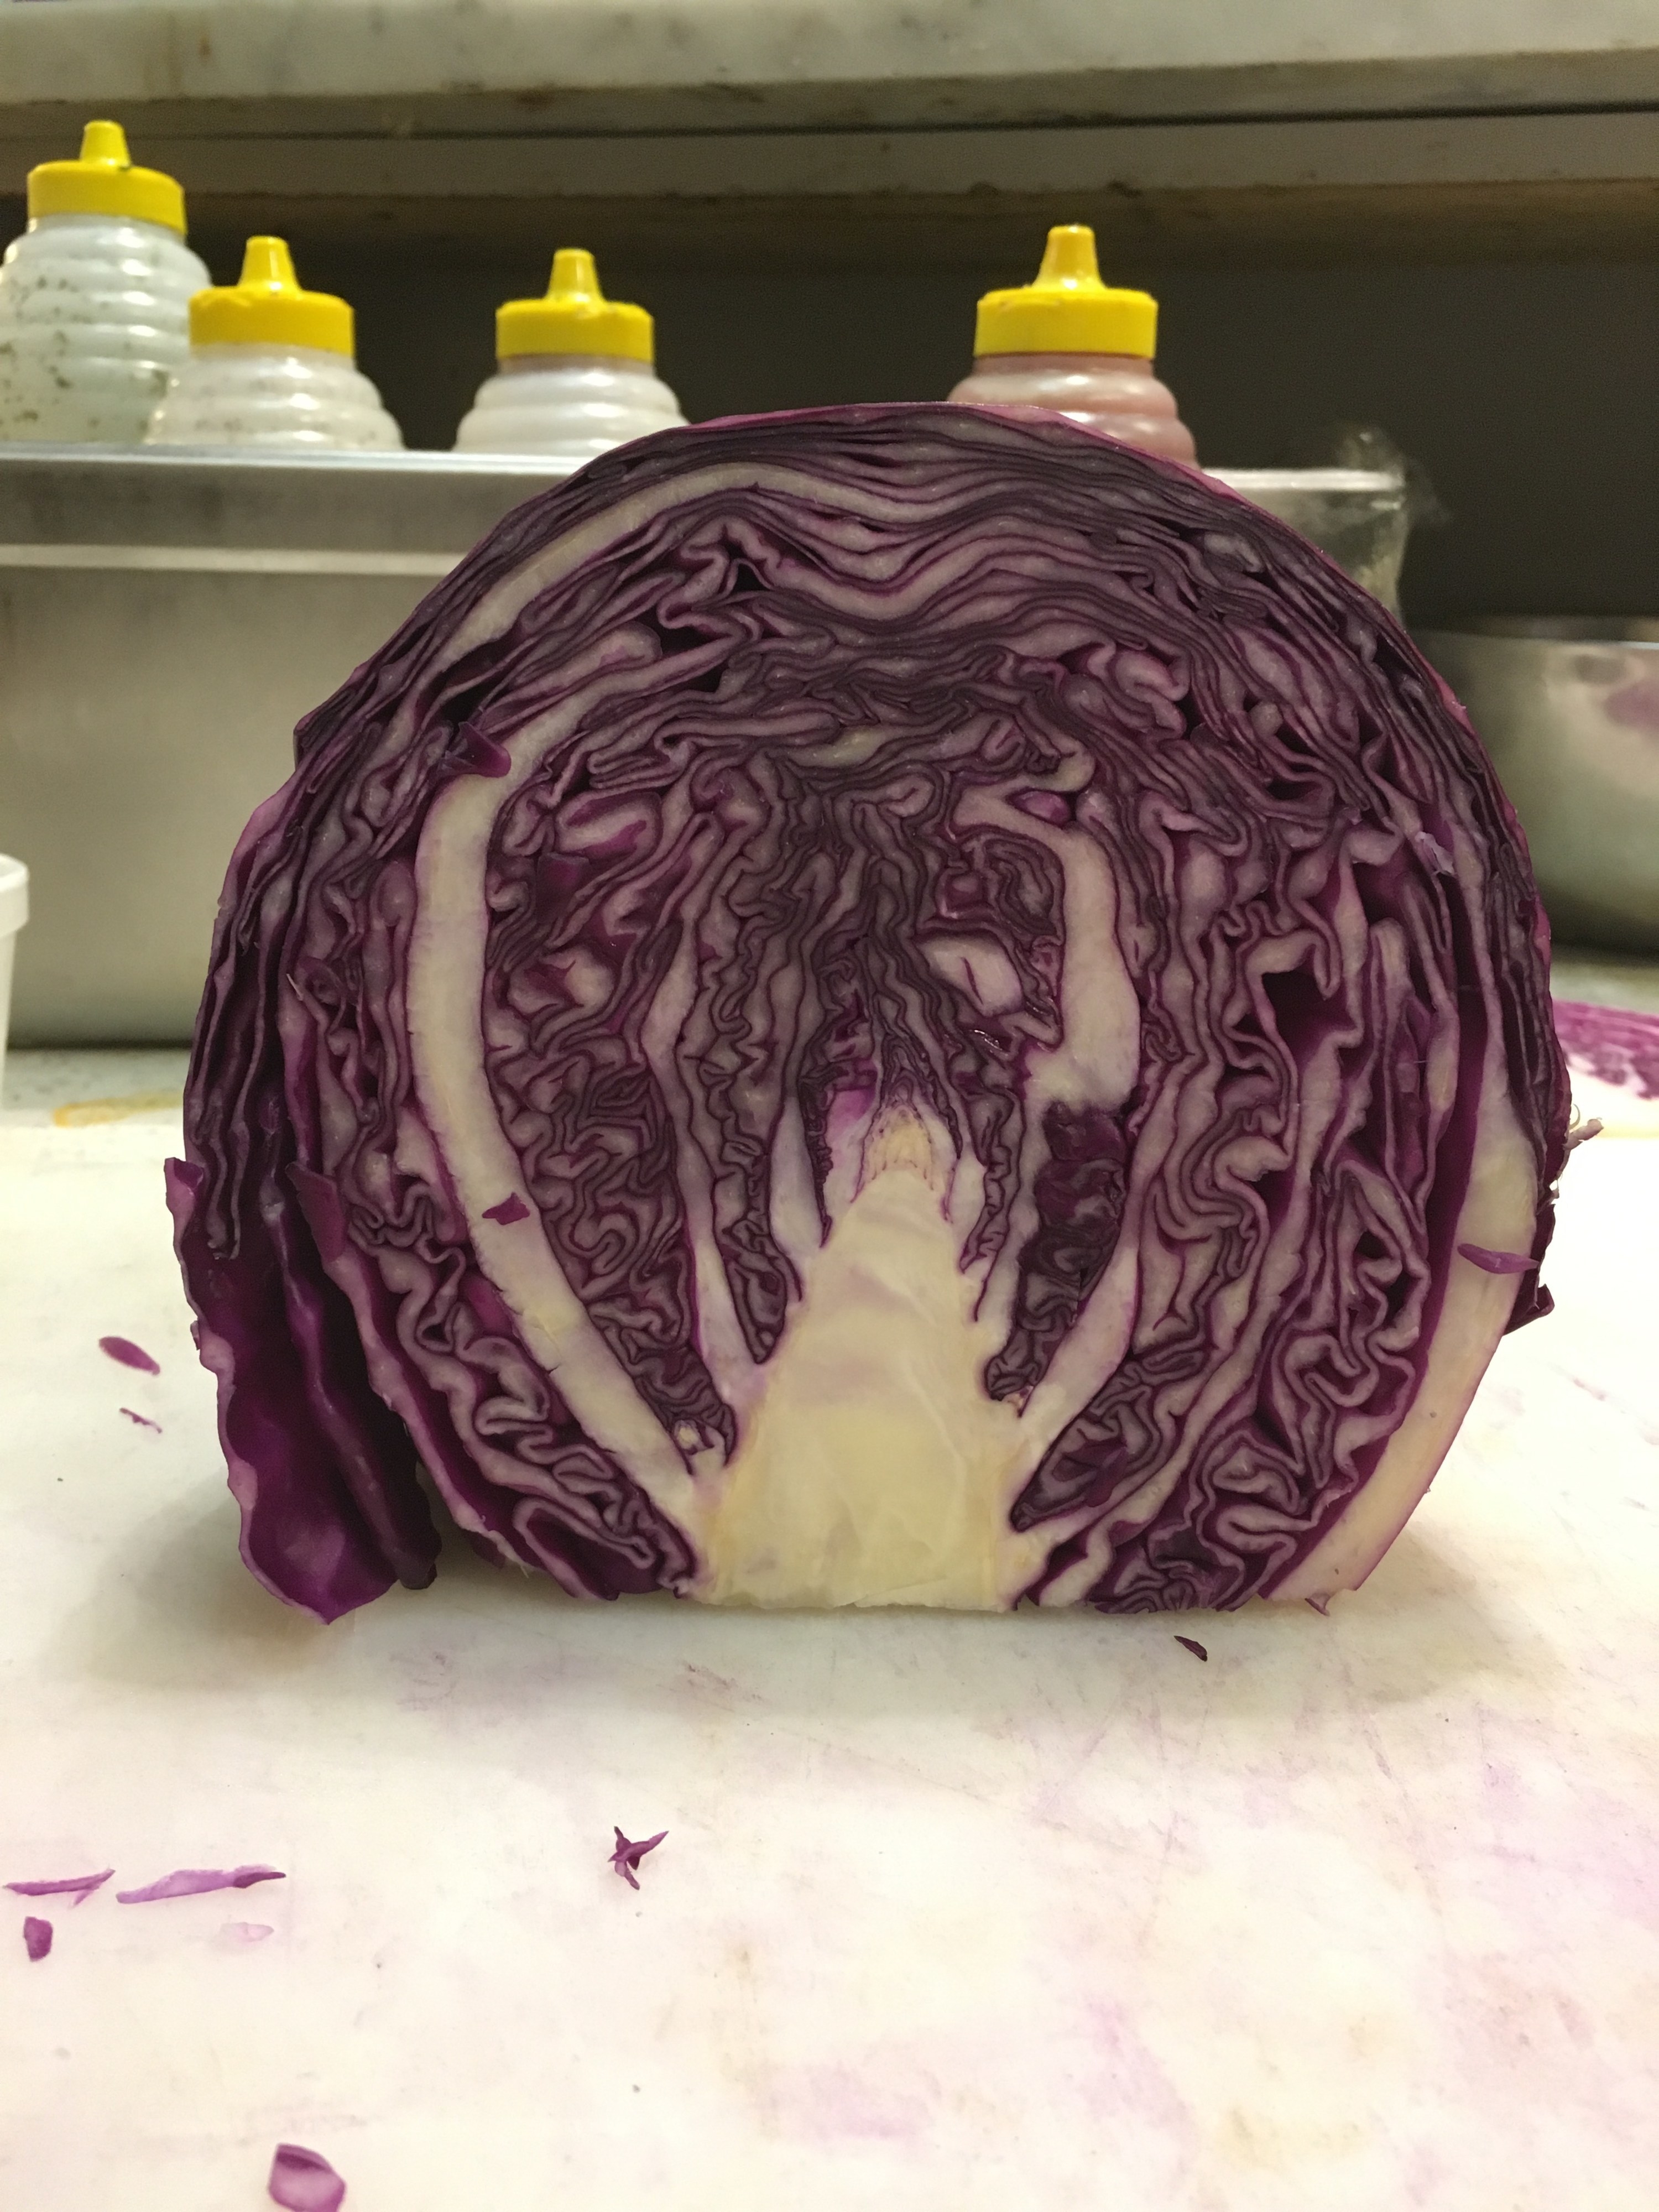 A red cabbage cut in half with the middle stalk looking like a long hallway floor